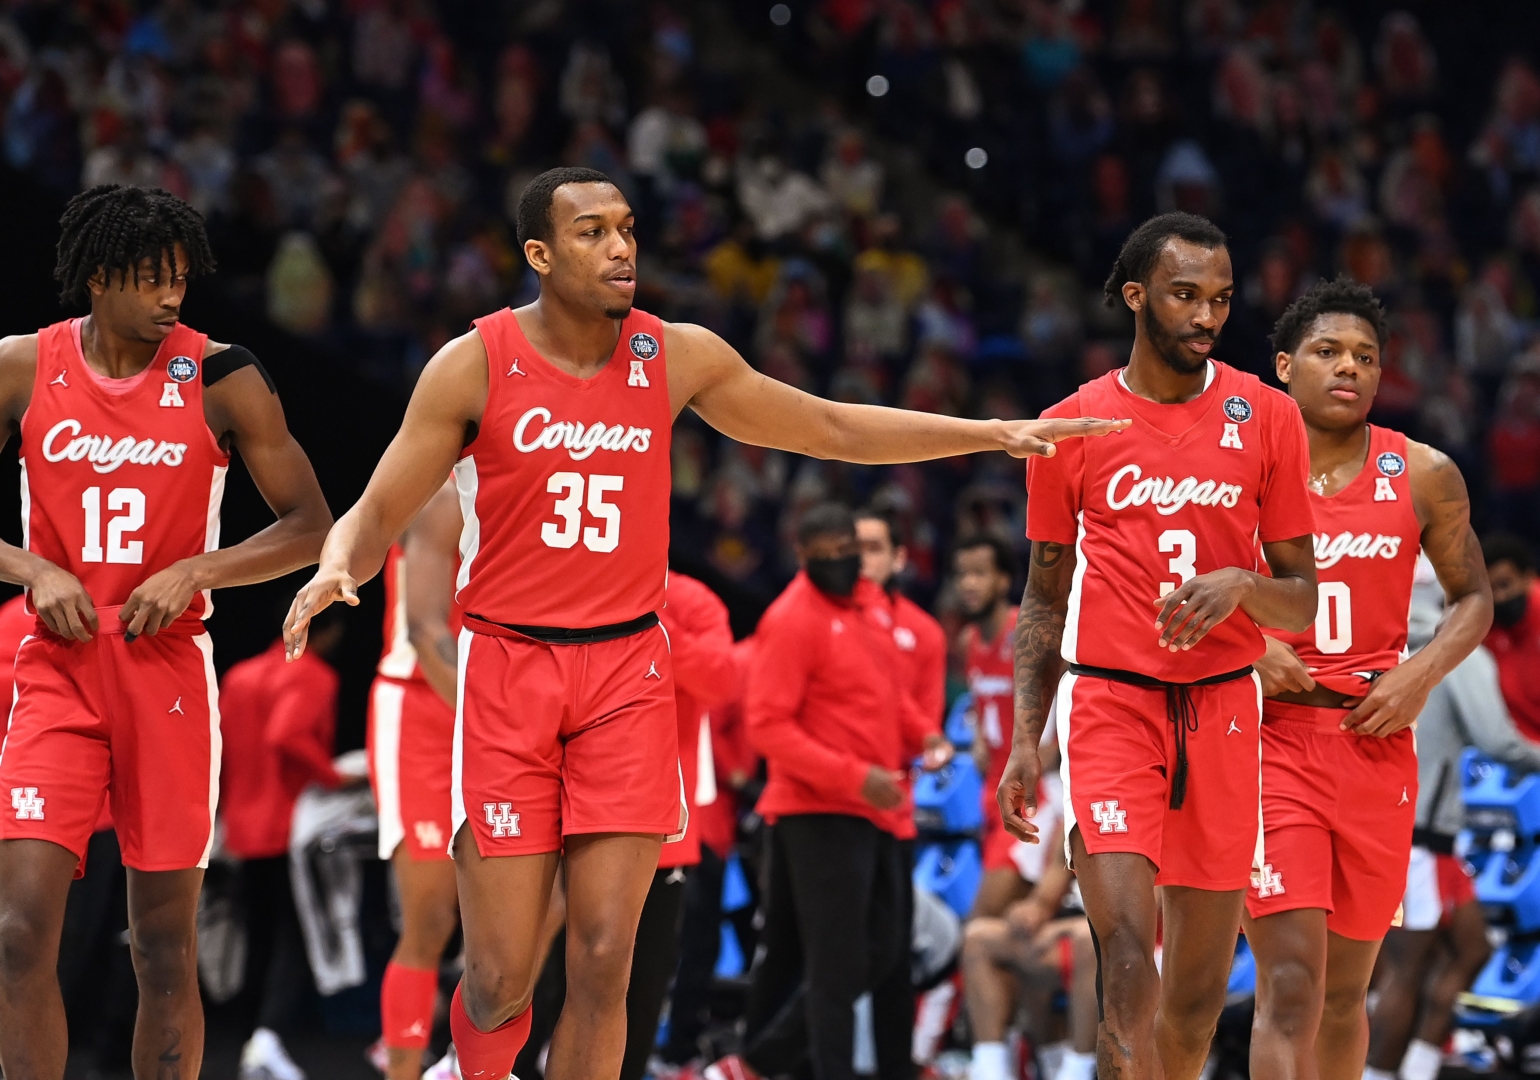 Tramon Mark (12), Reggie Chaney (32), DeJon Jarreau (3) and Marcus Sasser (0) of the UH Cougars walk across the court during the first half of their game against the Baylor Bears in the Final Four semifinal game of the 2021 NCAA Men's Basketball Tournament at Lucas Oil Stadium on April 3 in Indianapolis. | Photo by Brett Wilhelm/NCAA Photos via Getty Images